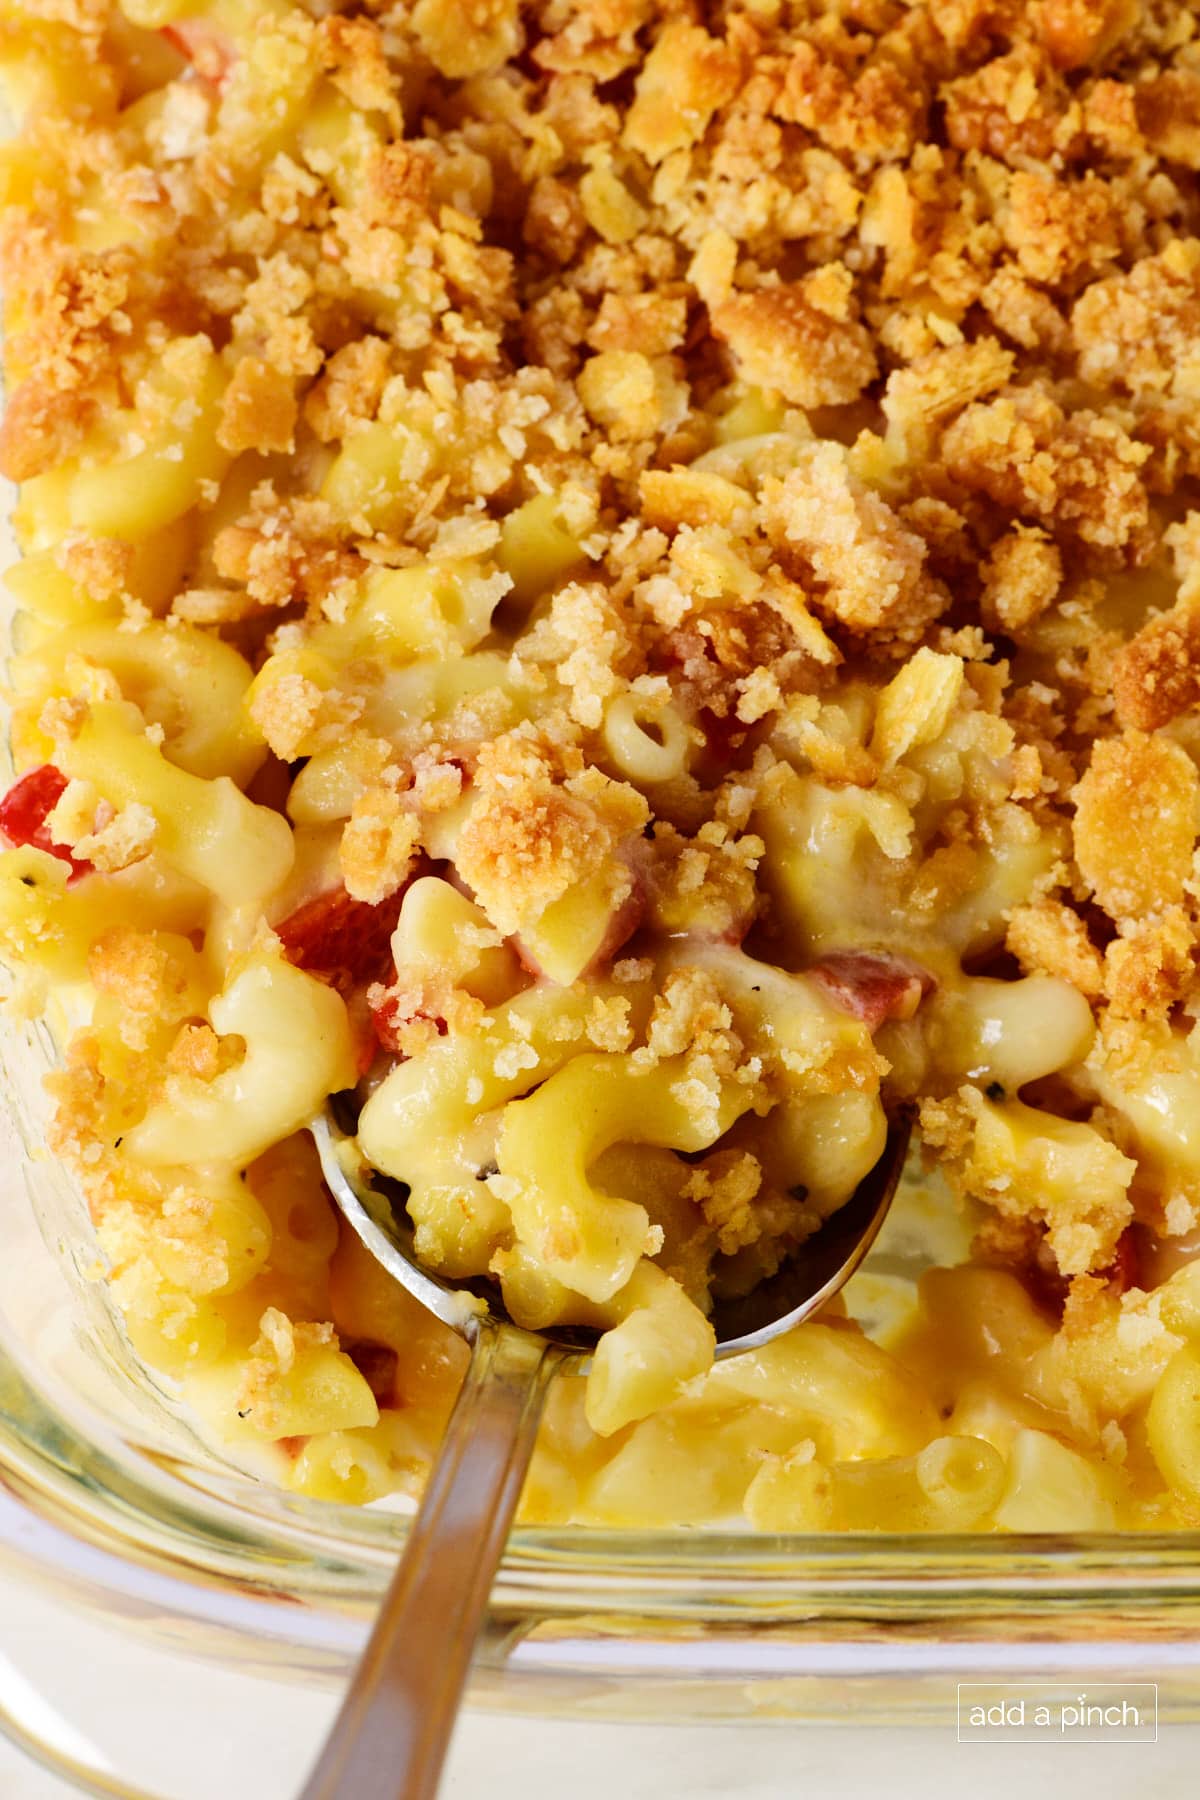 Closeup of macaroni and cheese in glass dish with spoon. Pimentos and cracker topping are visible with macaroni pasta and cheese.